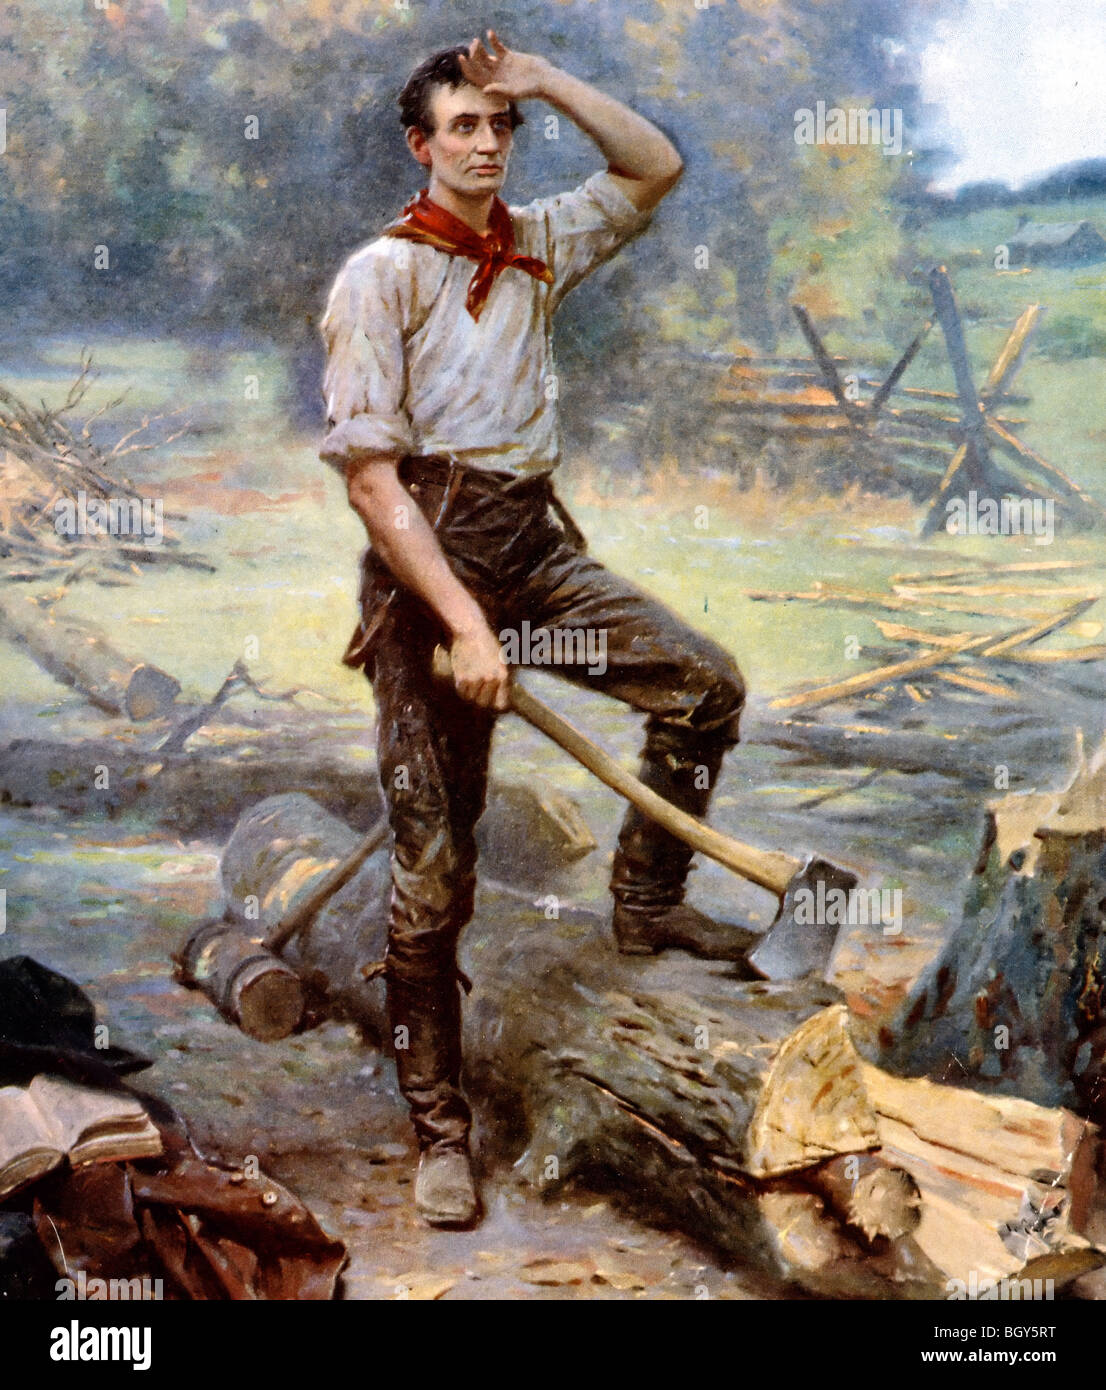 A young Abe Lincoln chopping wood, circa 1830 Stock Photo